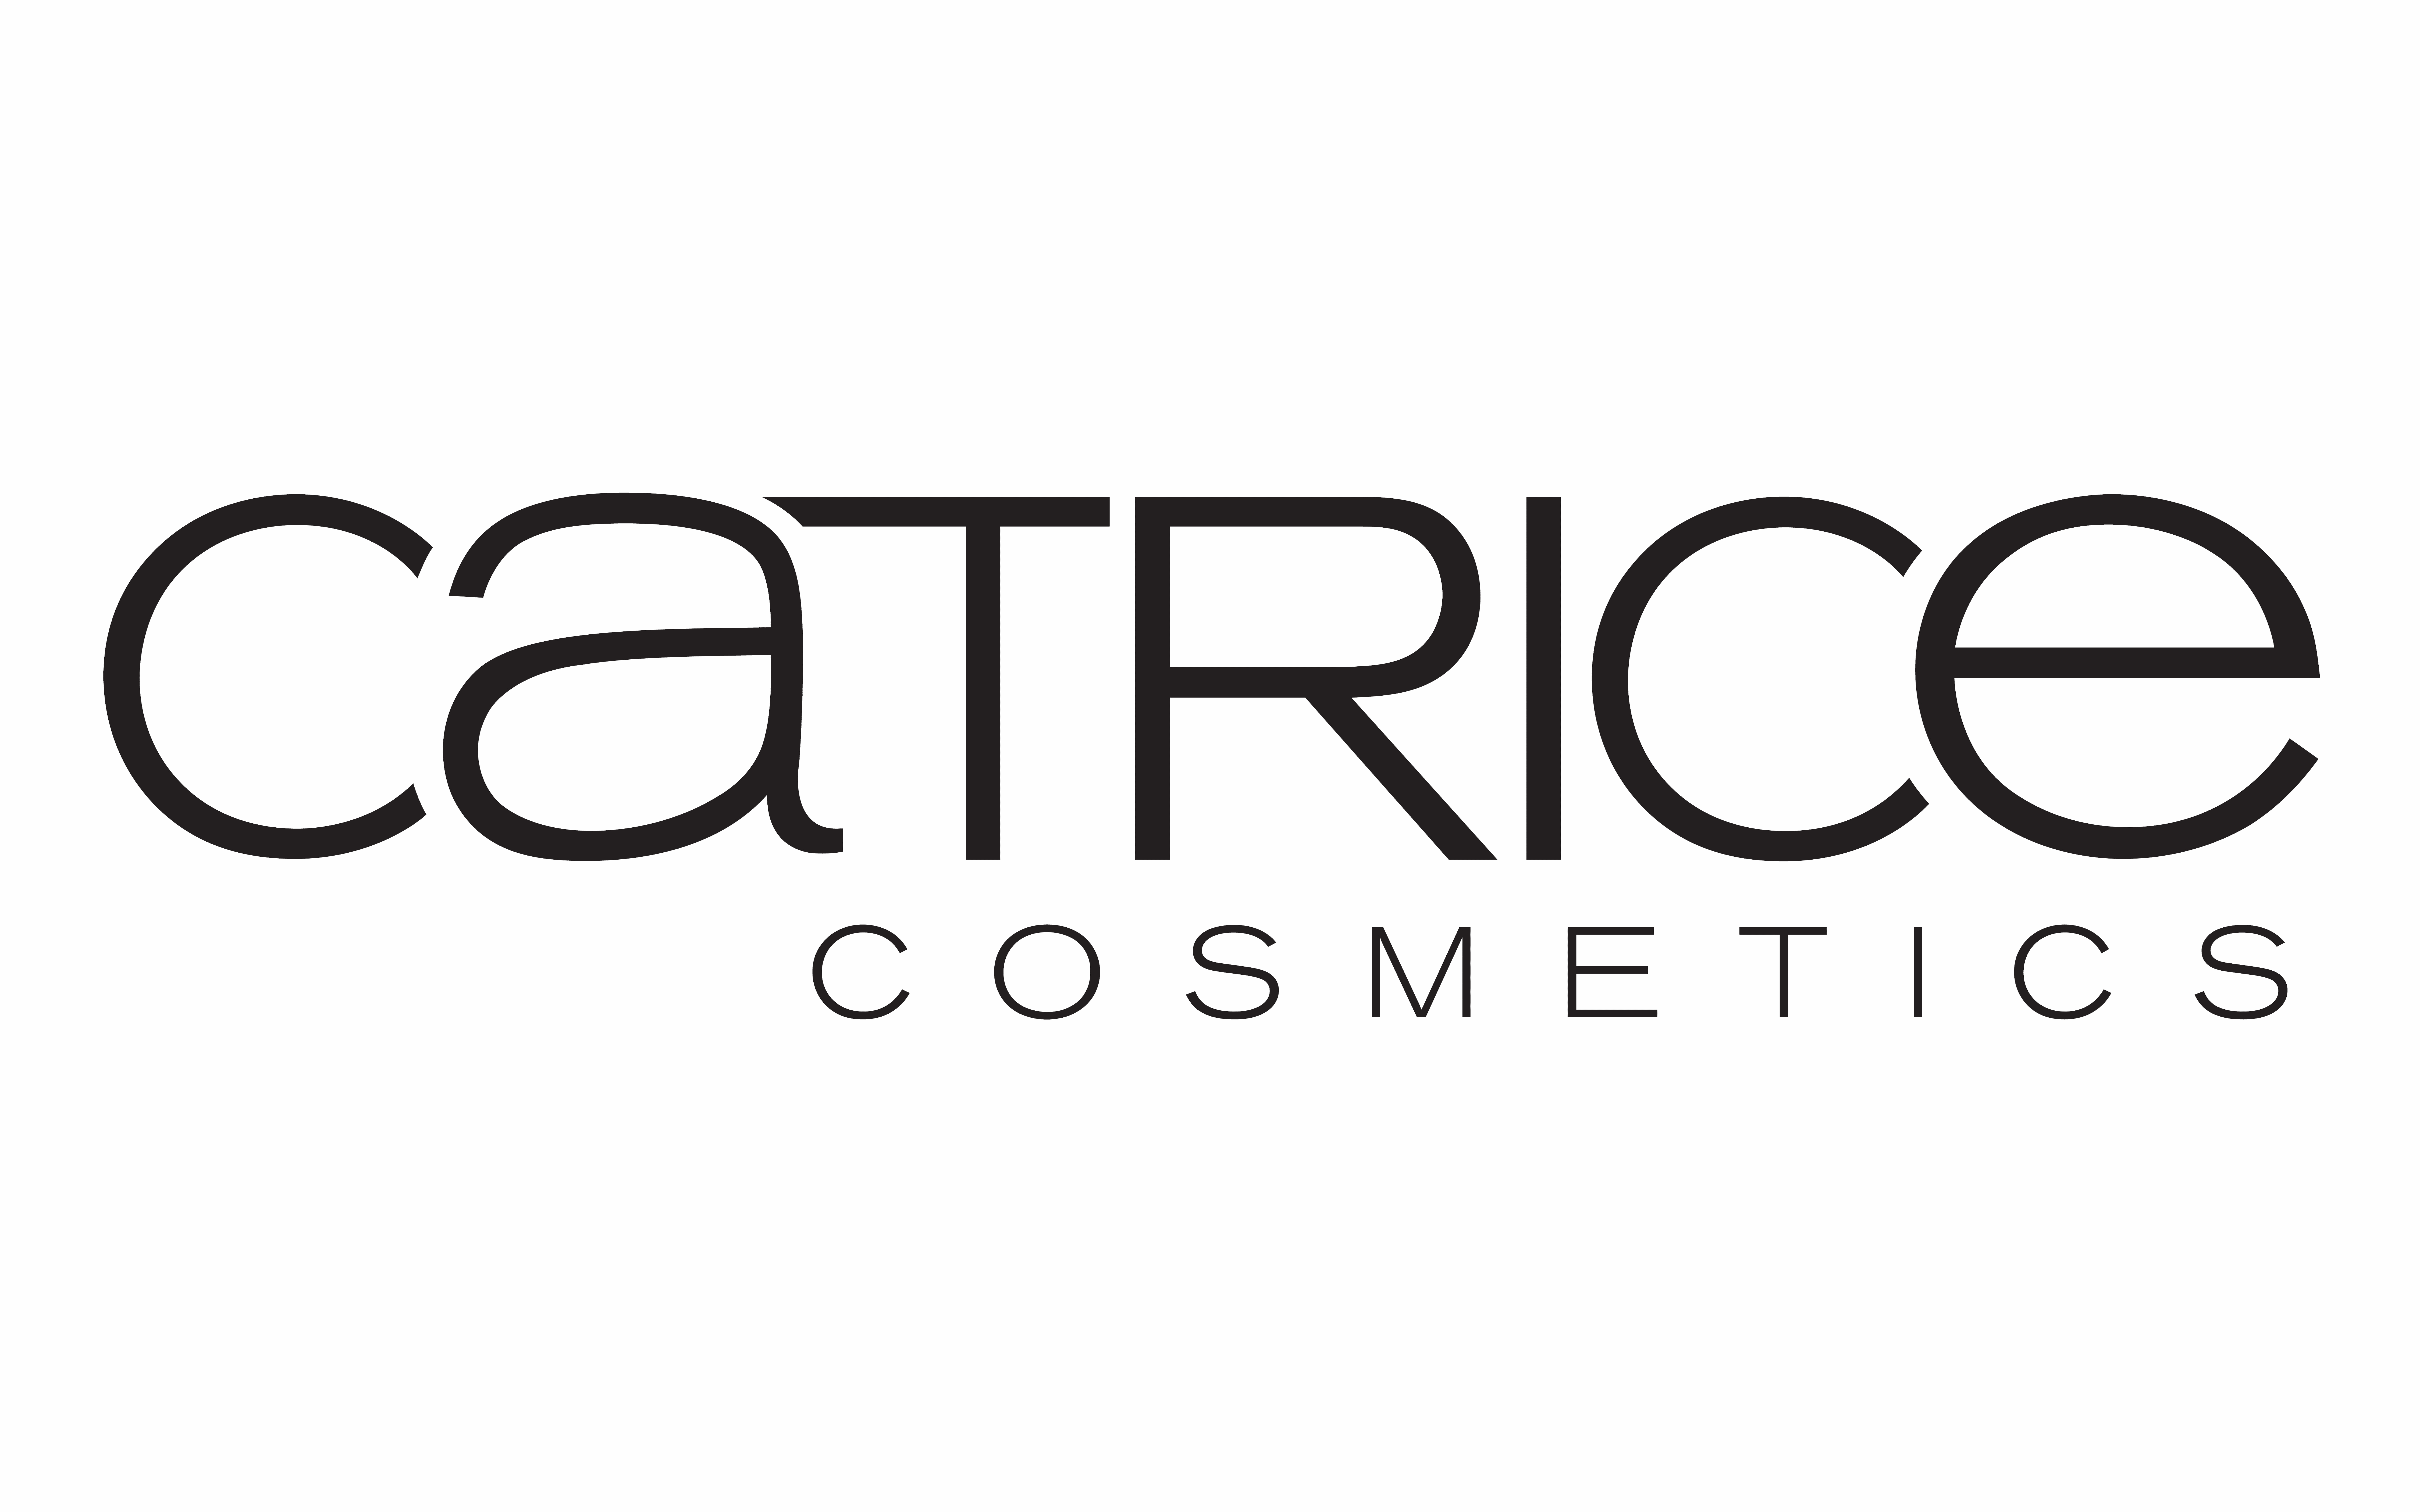 Catrice Logo And Symbol Meaning